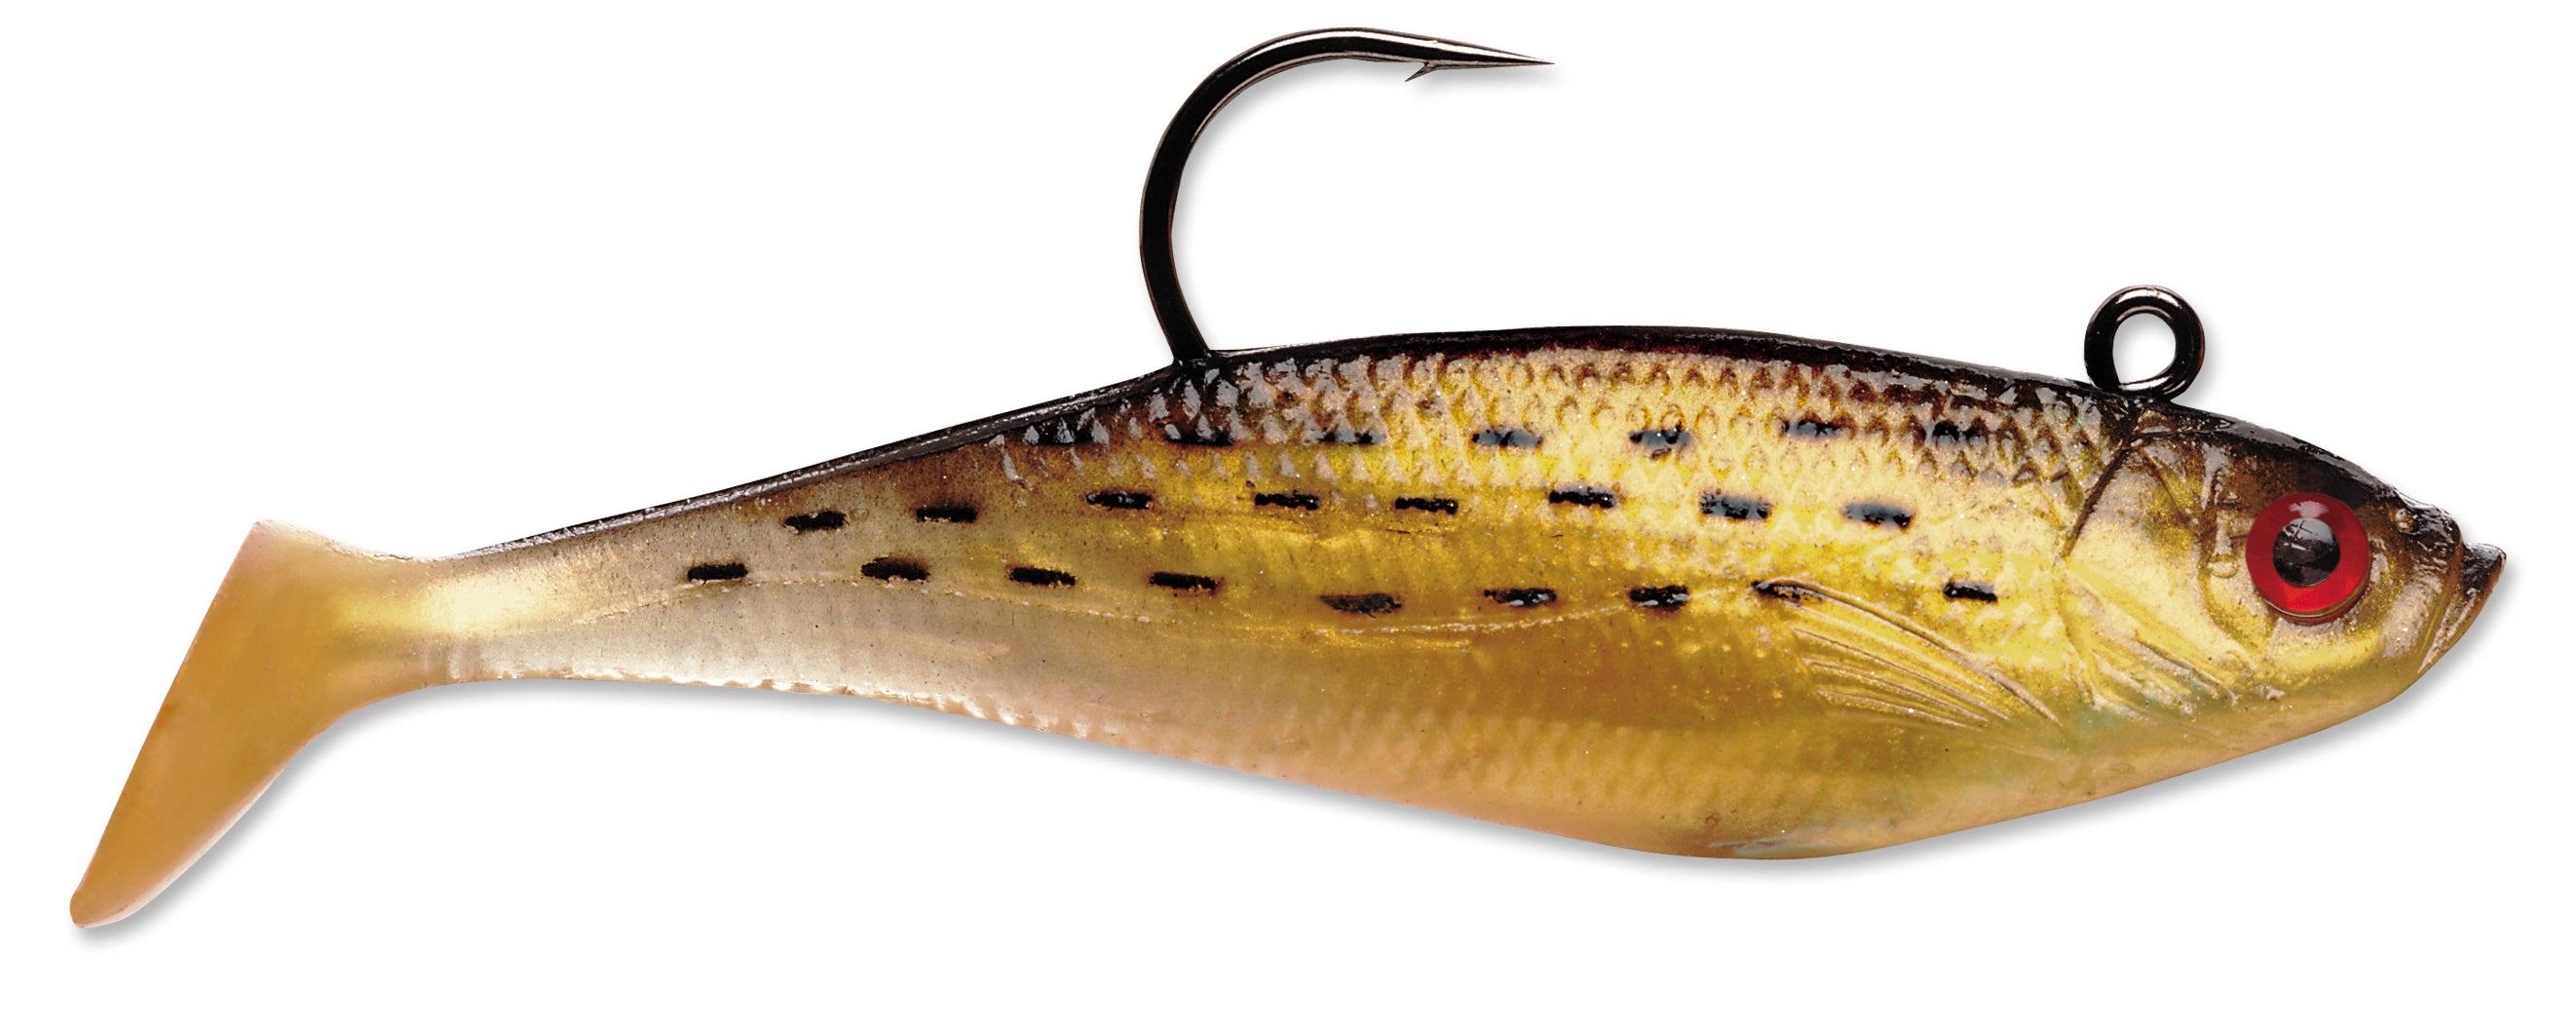 4 AFTER DARK PADDLE TAIL SWIMBAIT SOFT PLASTIC BAITS- 6 PACK